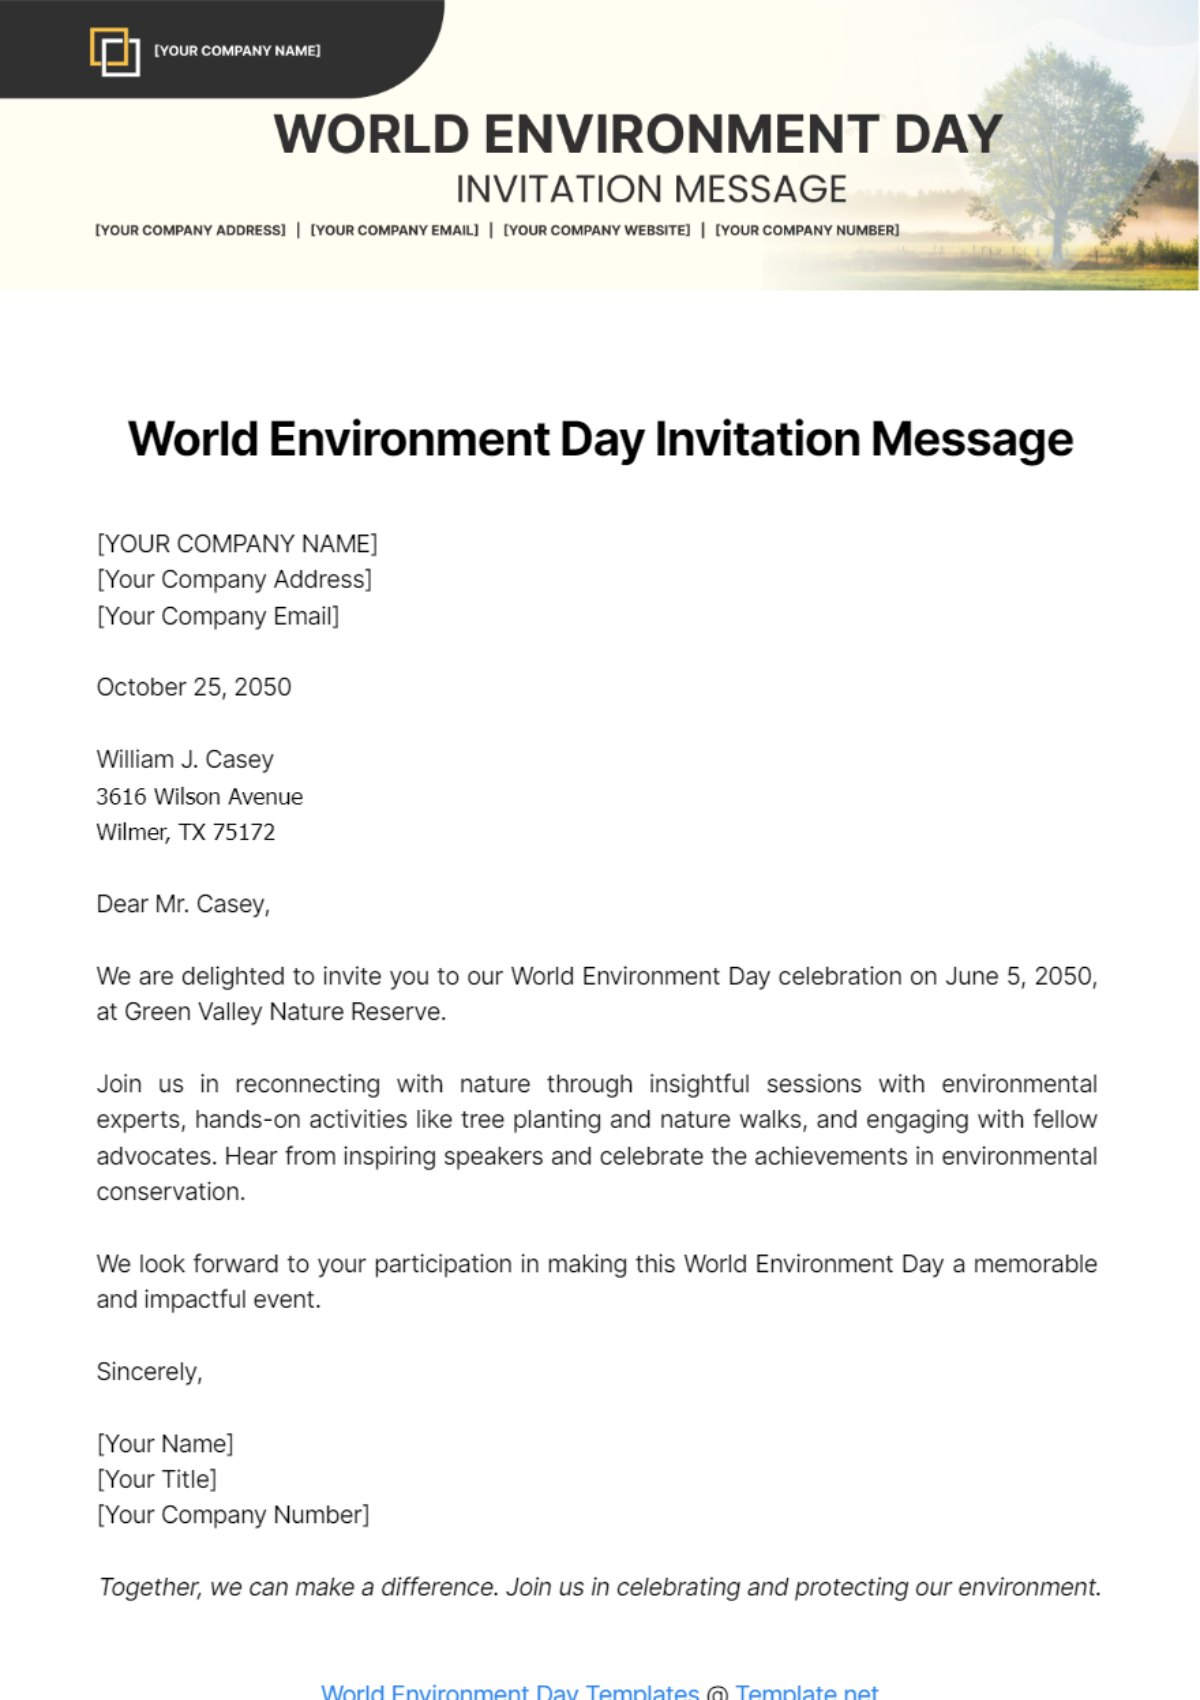 Free World Environment Day Invitation Message Template